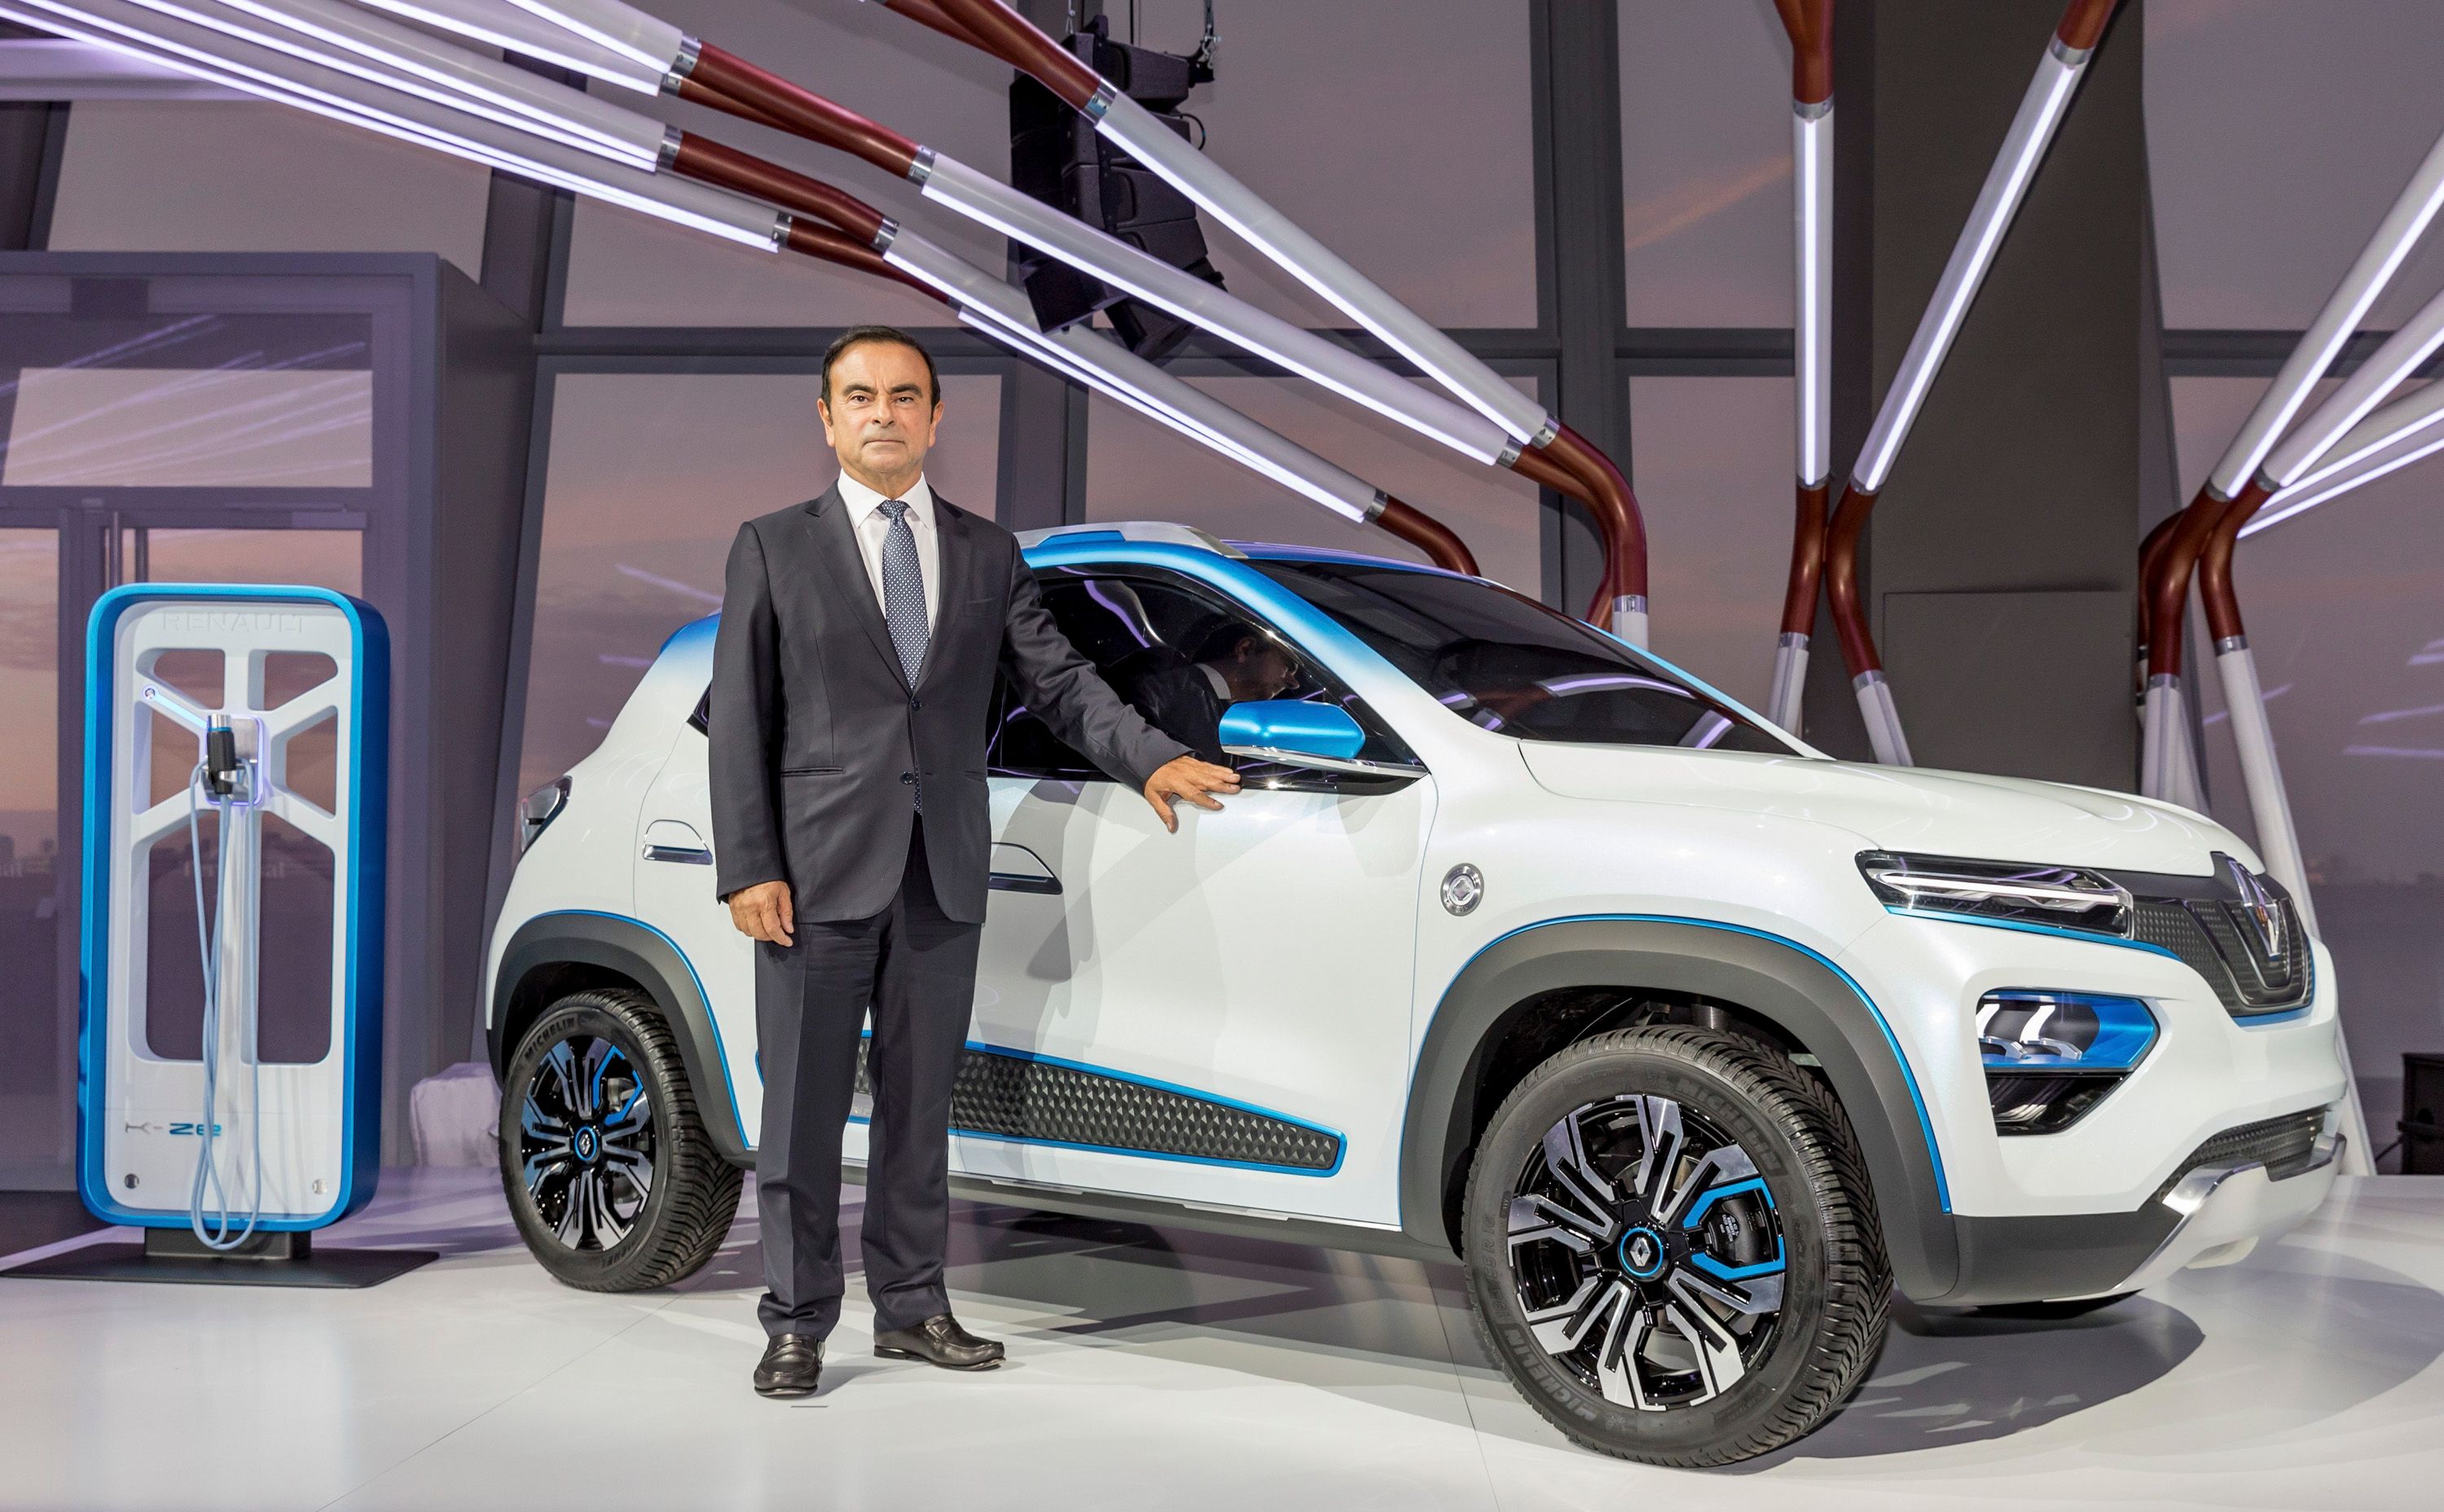 2019 - 2020 The Future of Renault Lies in this KWID-Based Electric Crossover Concept from the Paris Motor Show